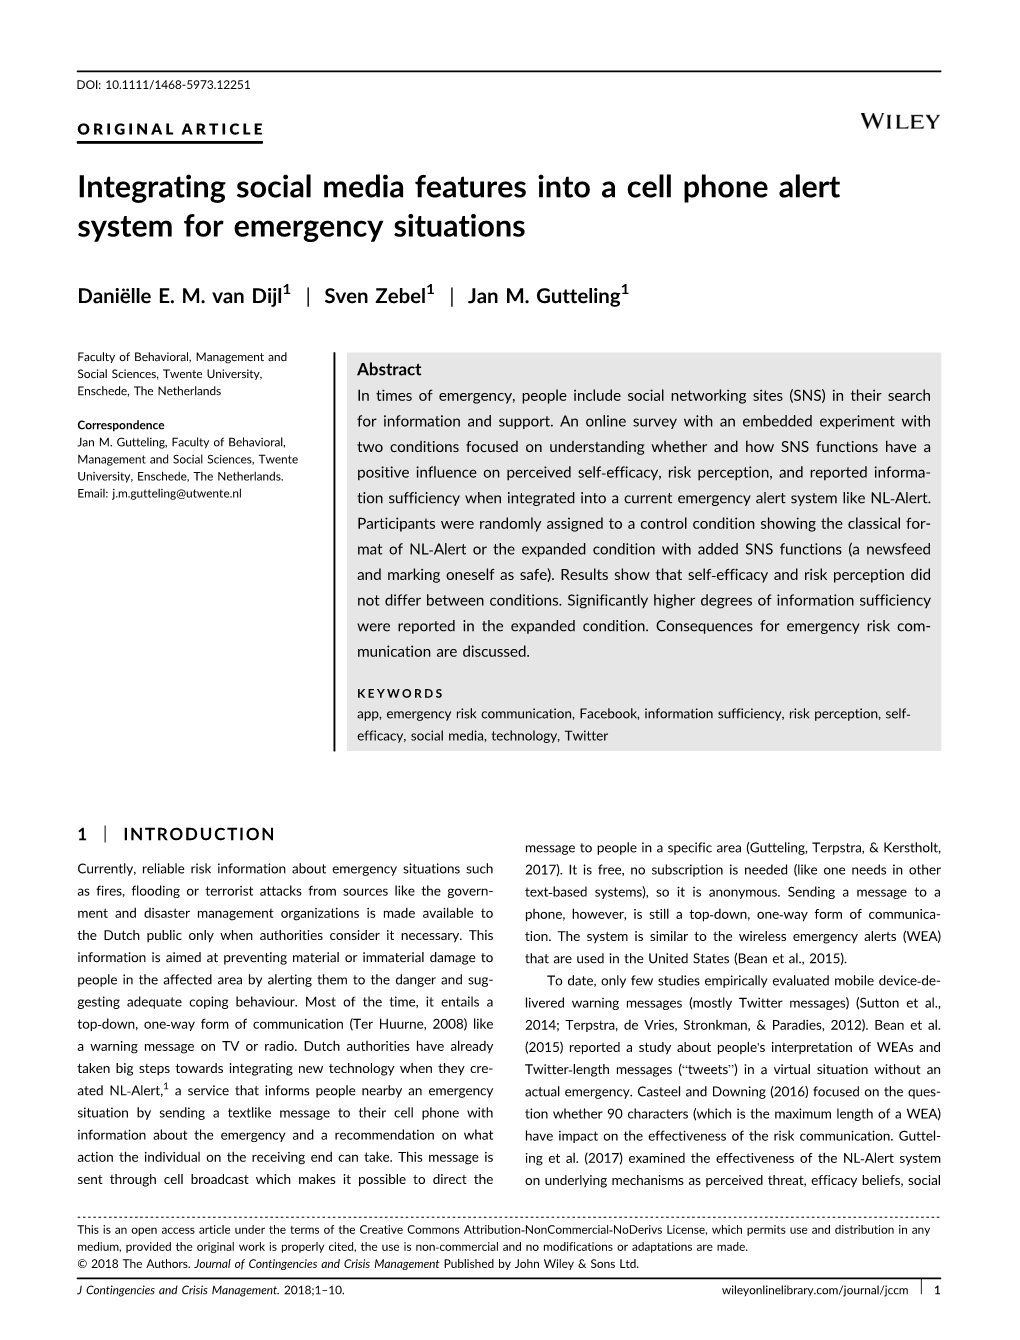 Integrating Social Media Features Into a Cell Phone Alert System for Emergency Situations